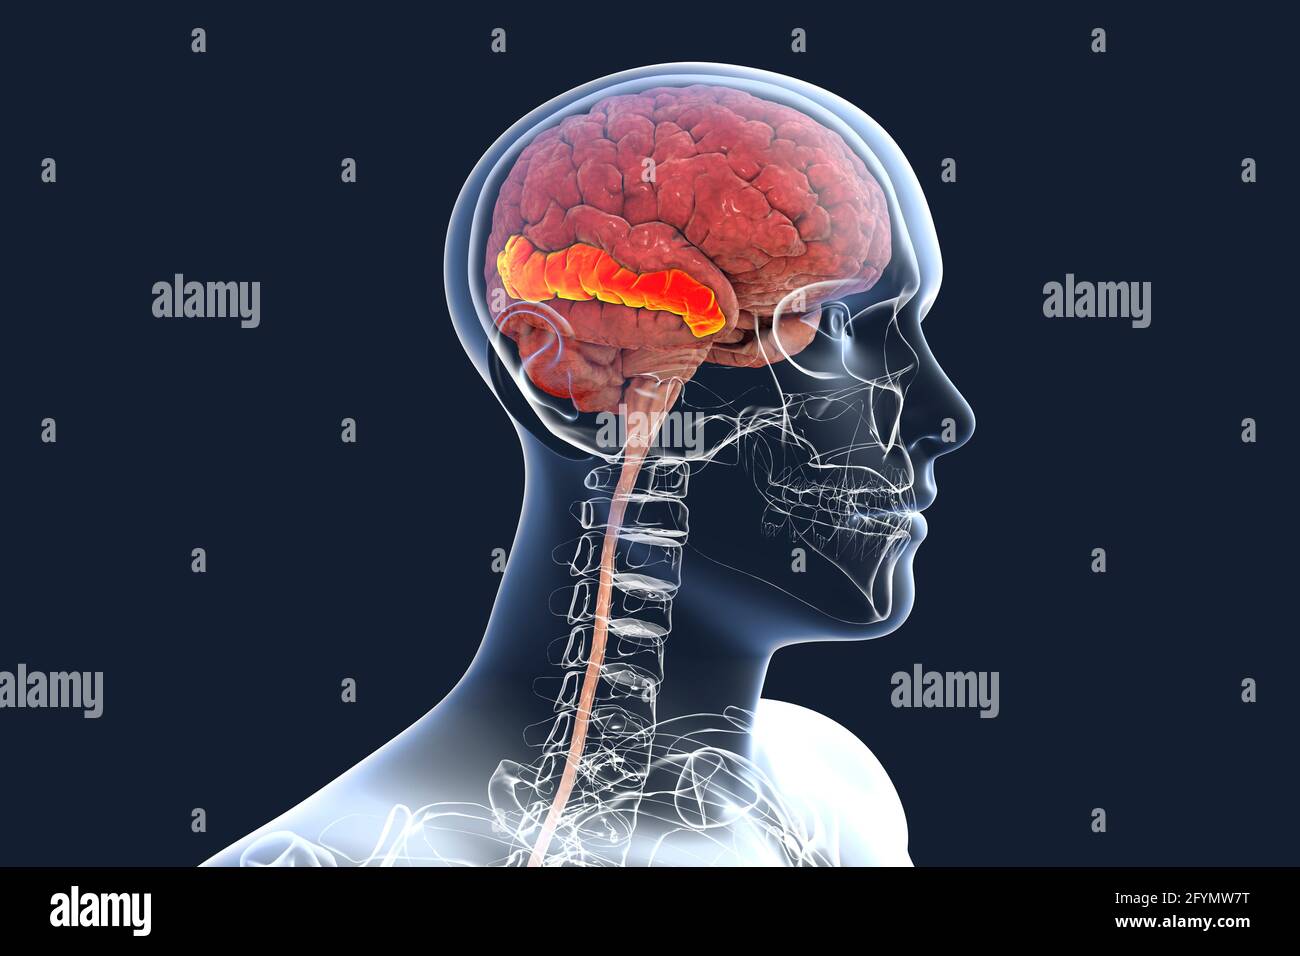 Brain with highlighted middle temporal gyrus, illustration Stock Photo